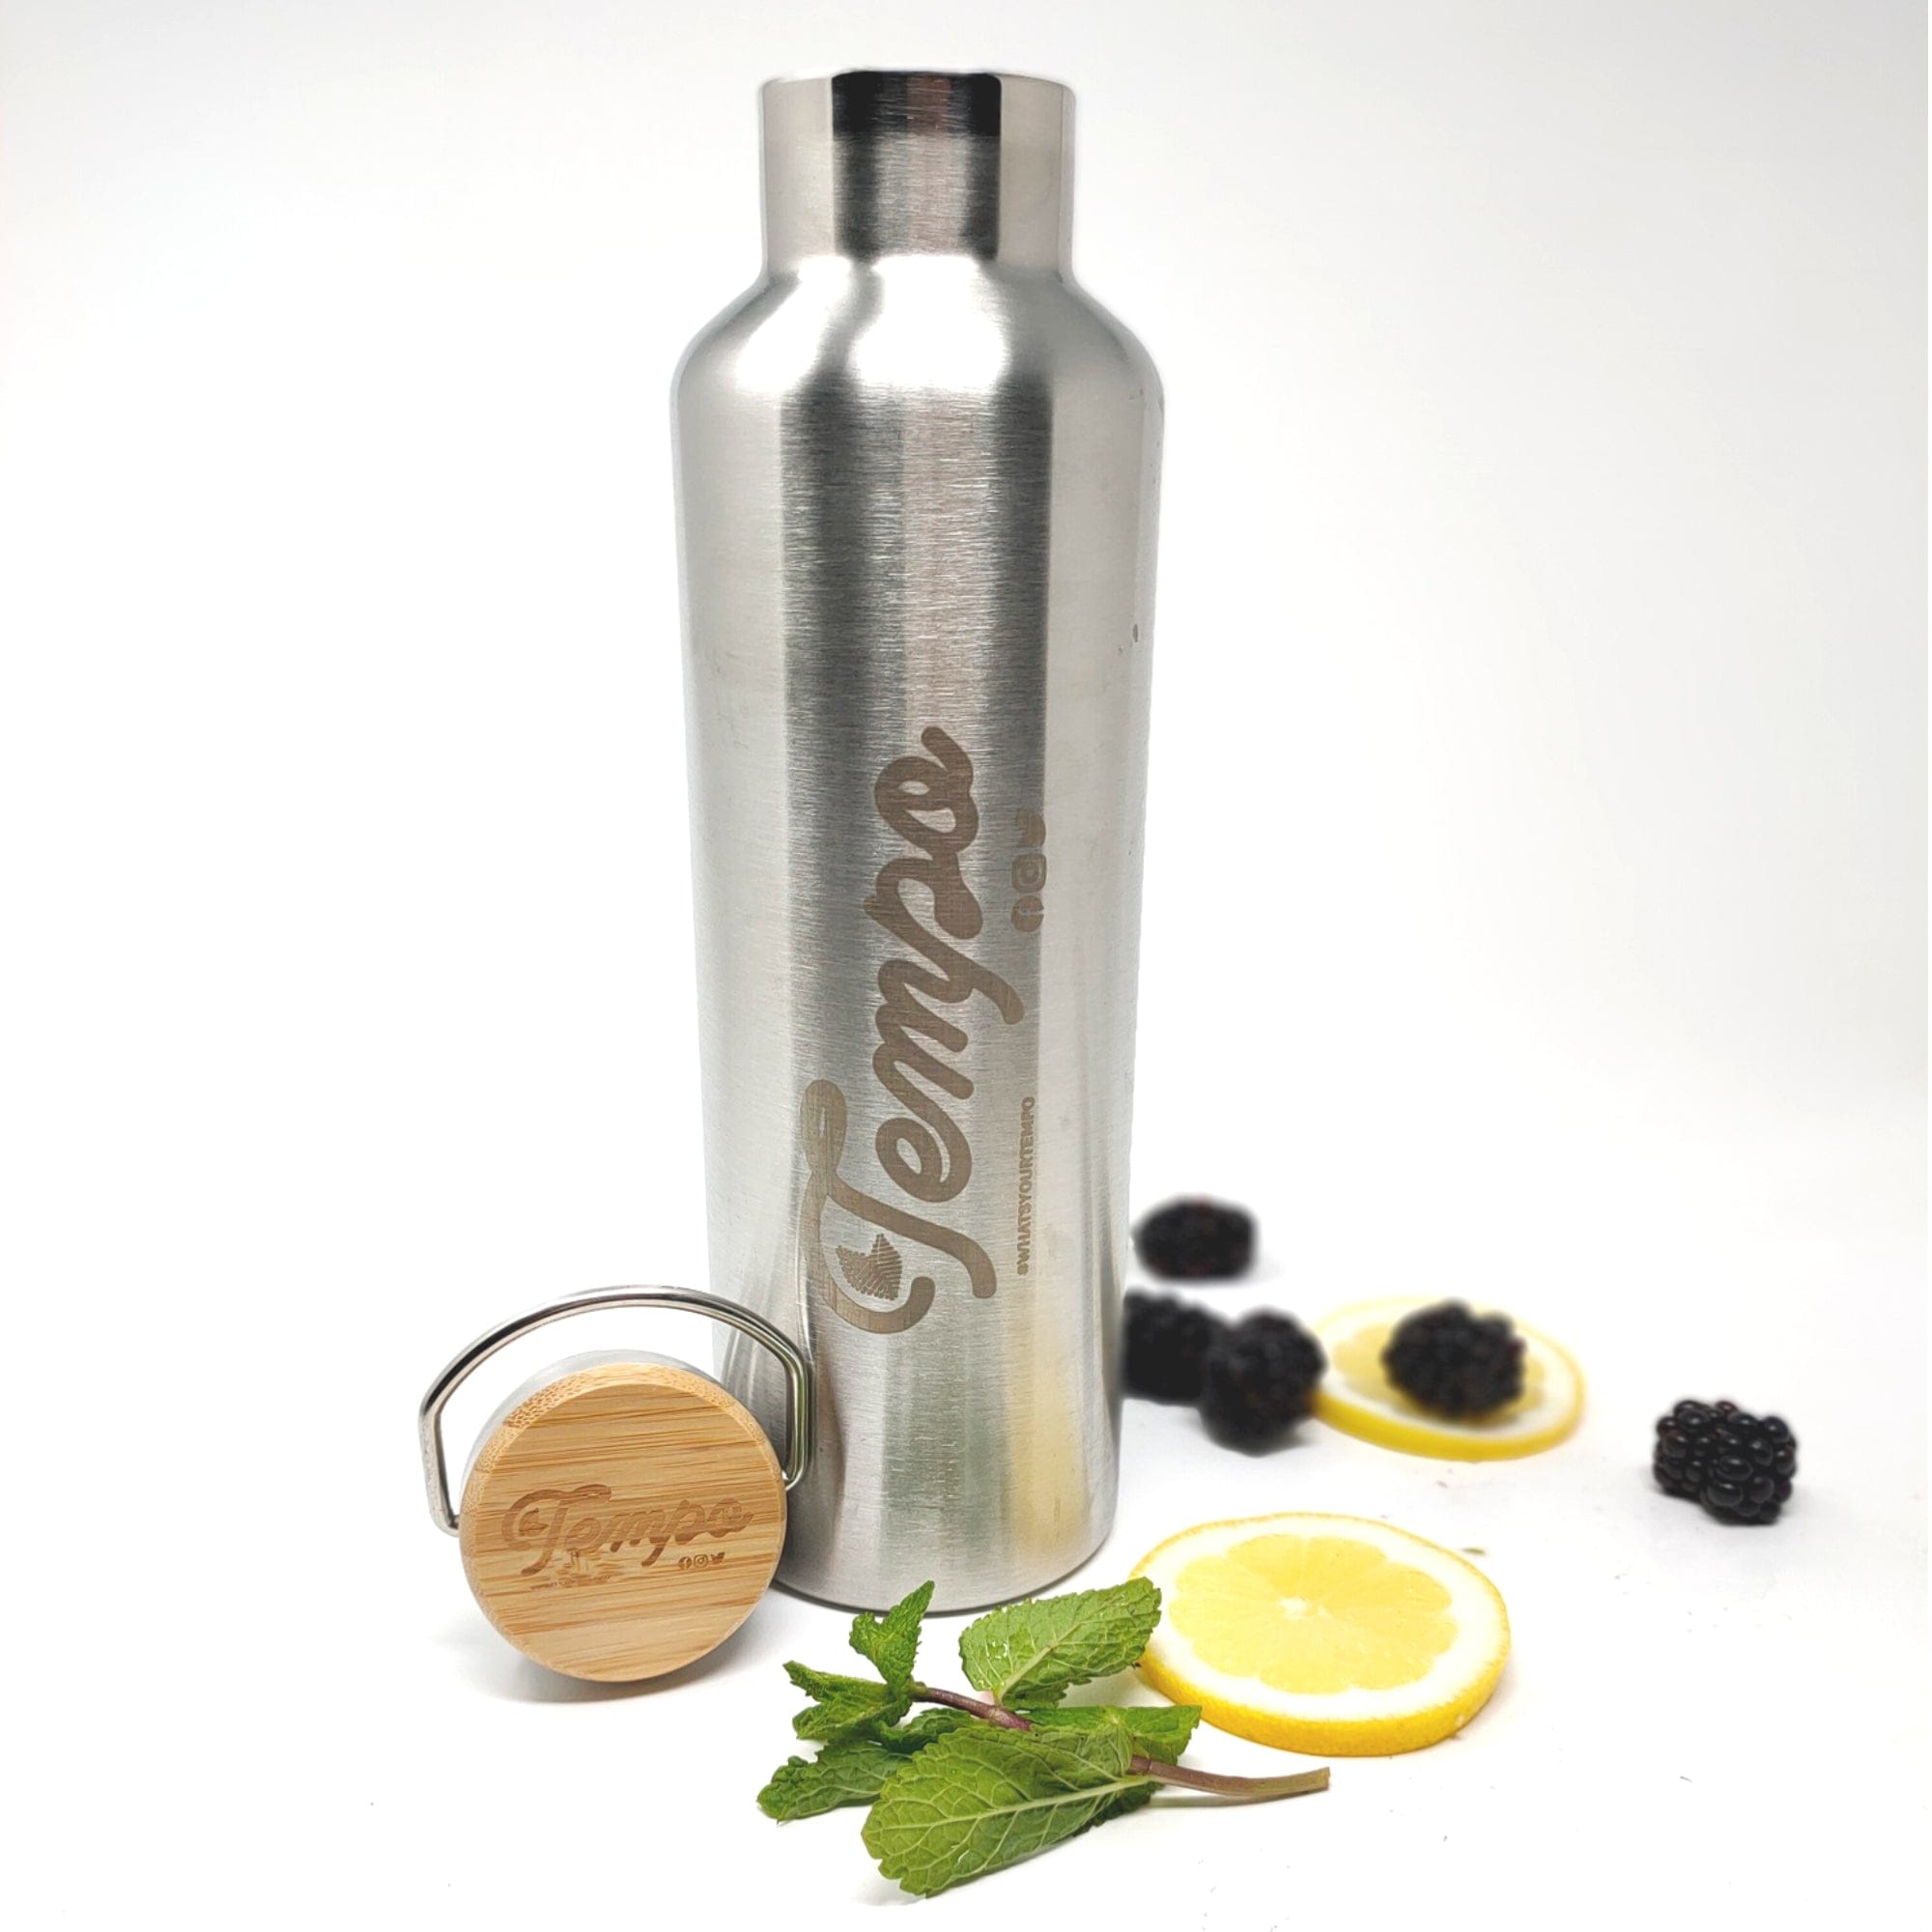 Tempo Reusable Stainless Steel Double Walled Tempo Water Bottle